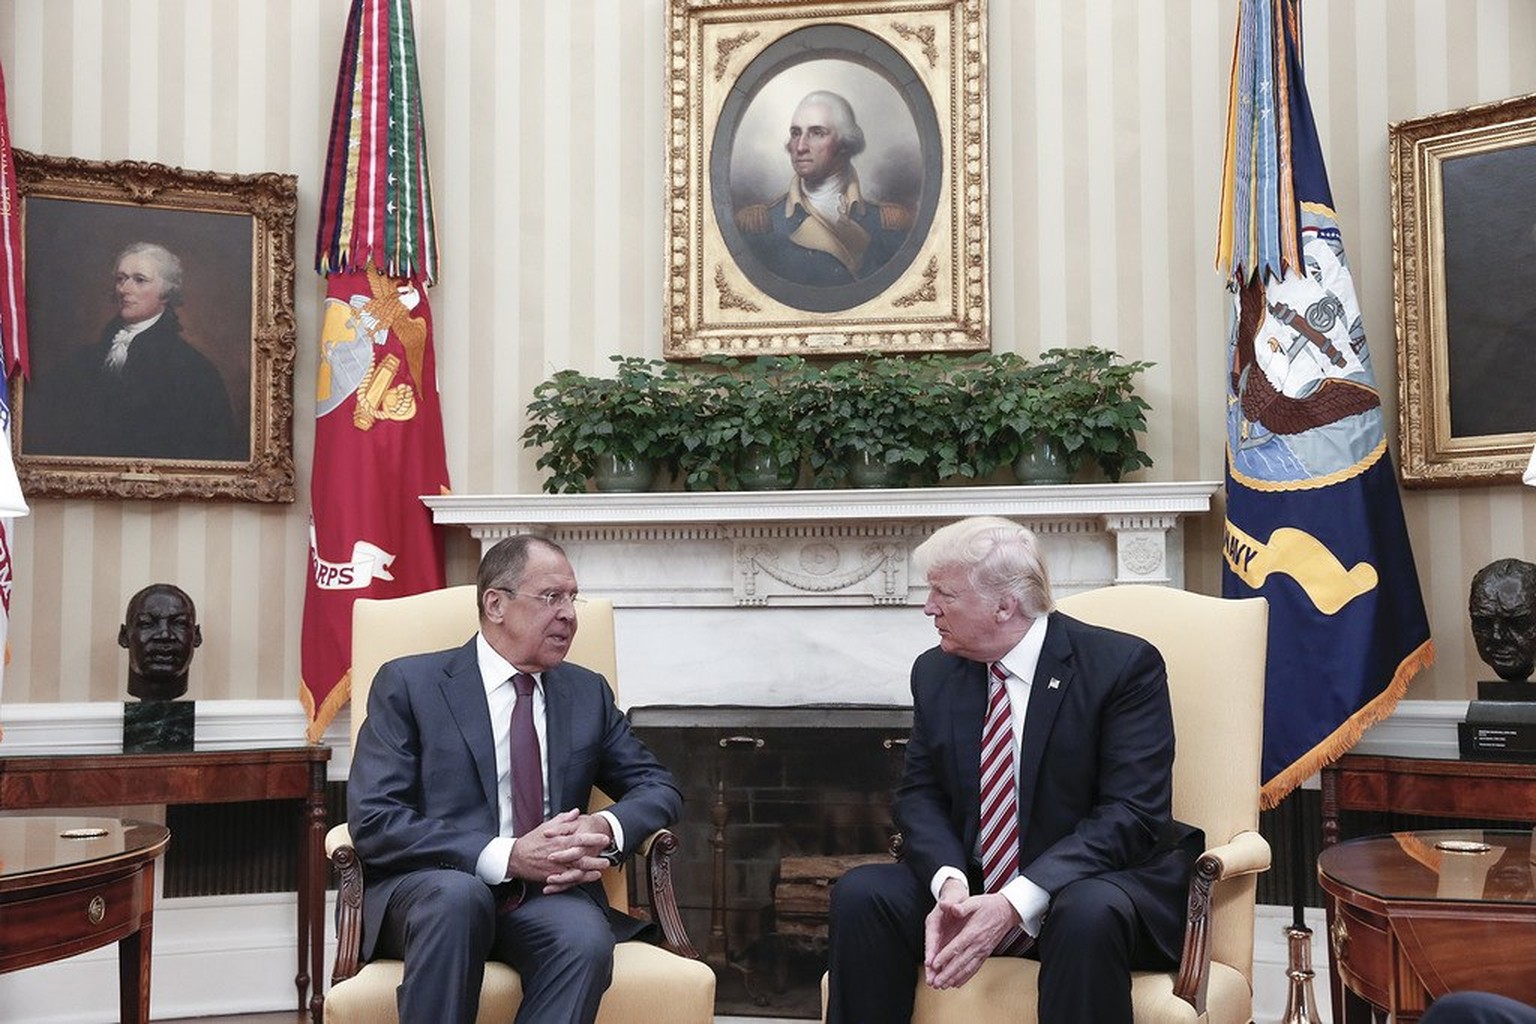 epa05955474 A handout photo made available by the Russian Foreign Ministry shows US President Donald J. Trump (R) speaking with Russian Foreign Minister Sergei Lavrov (L) during their meeting in the W ...